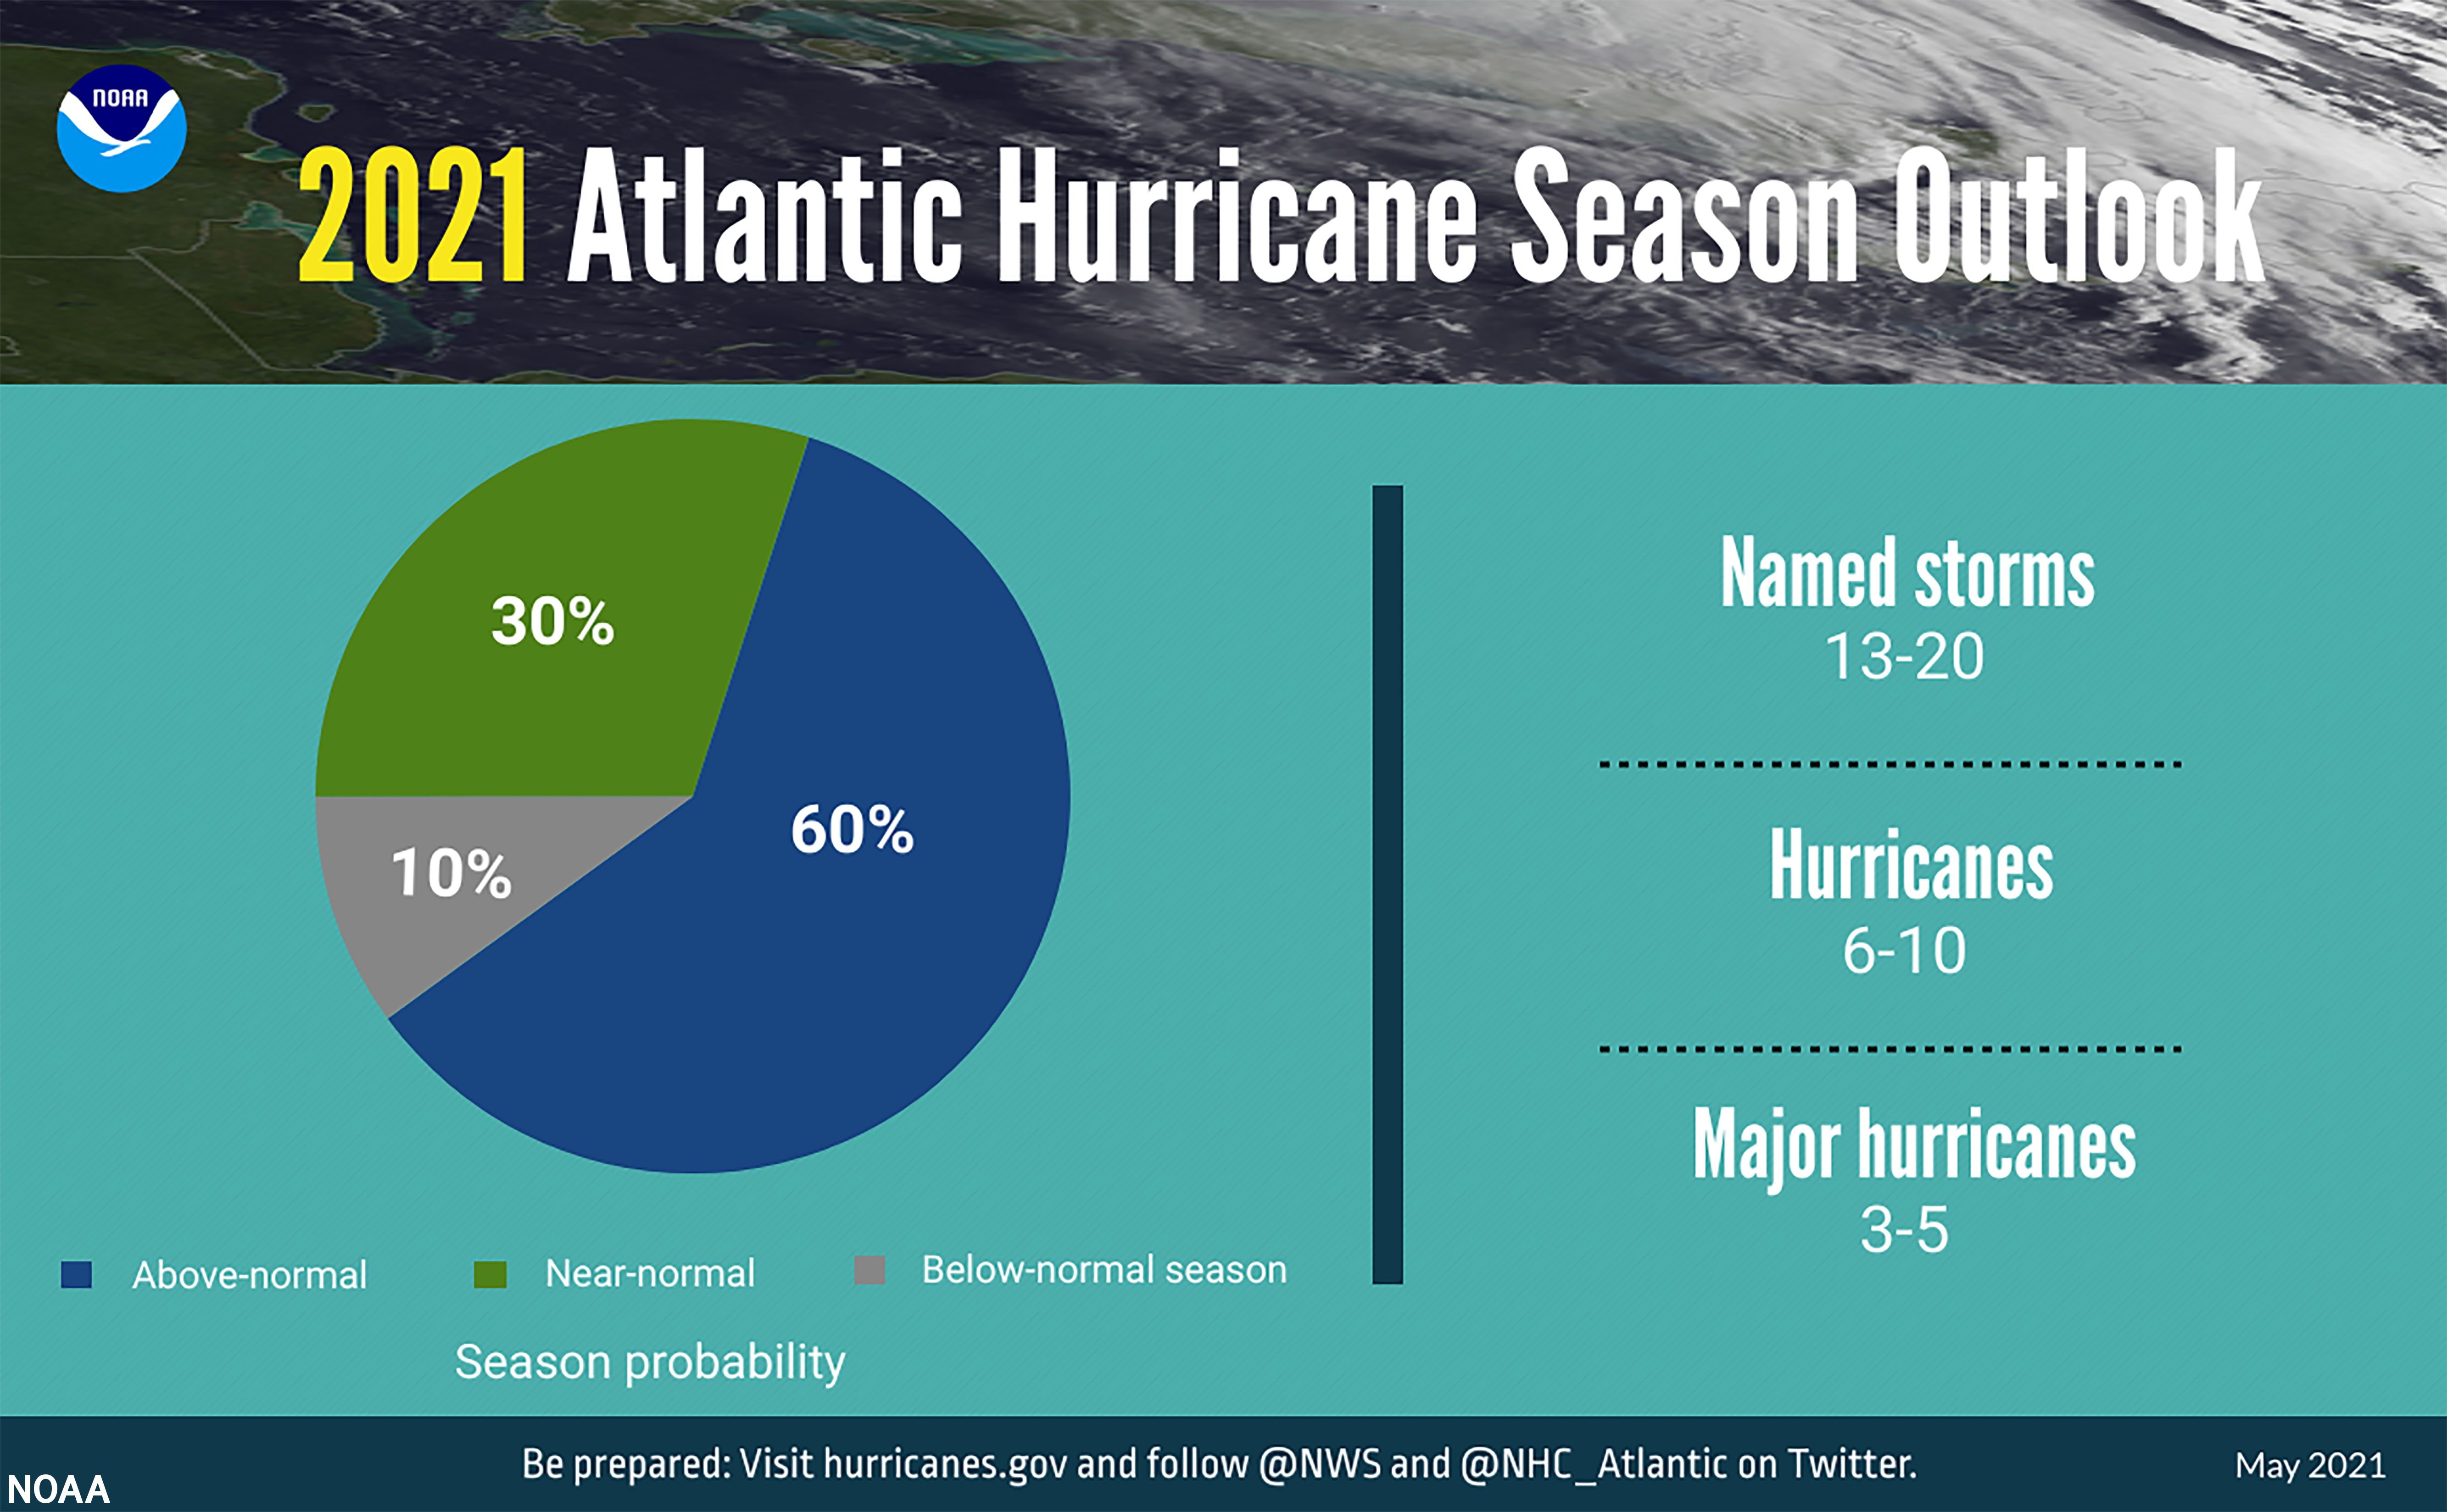 infographic depicting Hurricane Season Probability and Numbers of Named Storms Predicted from NOAA’s 2021 Atlantic Hurricane Season Outlook